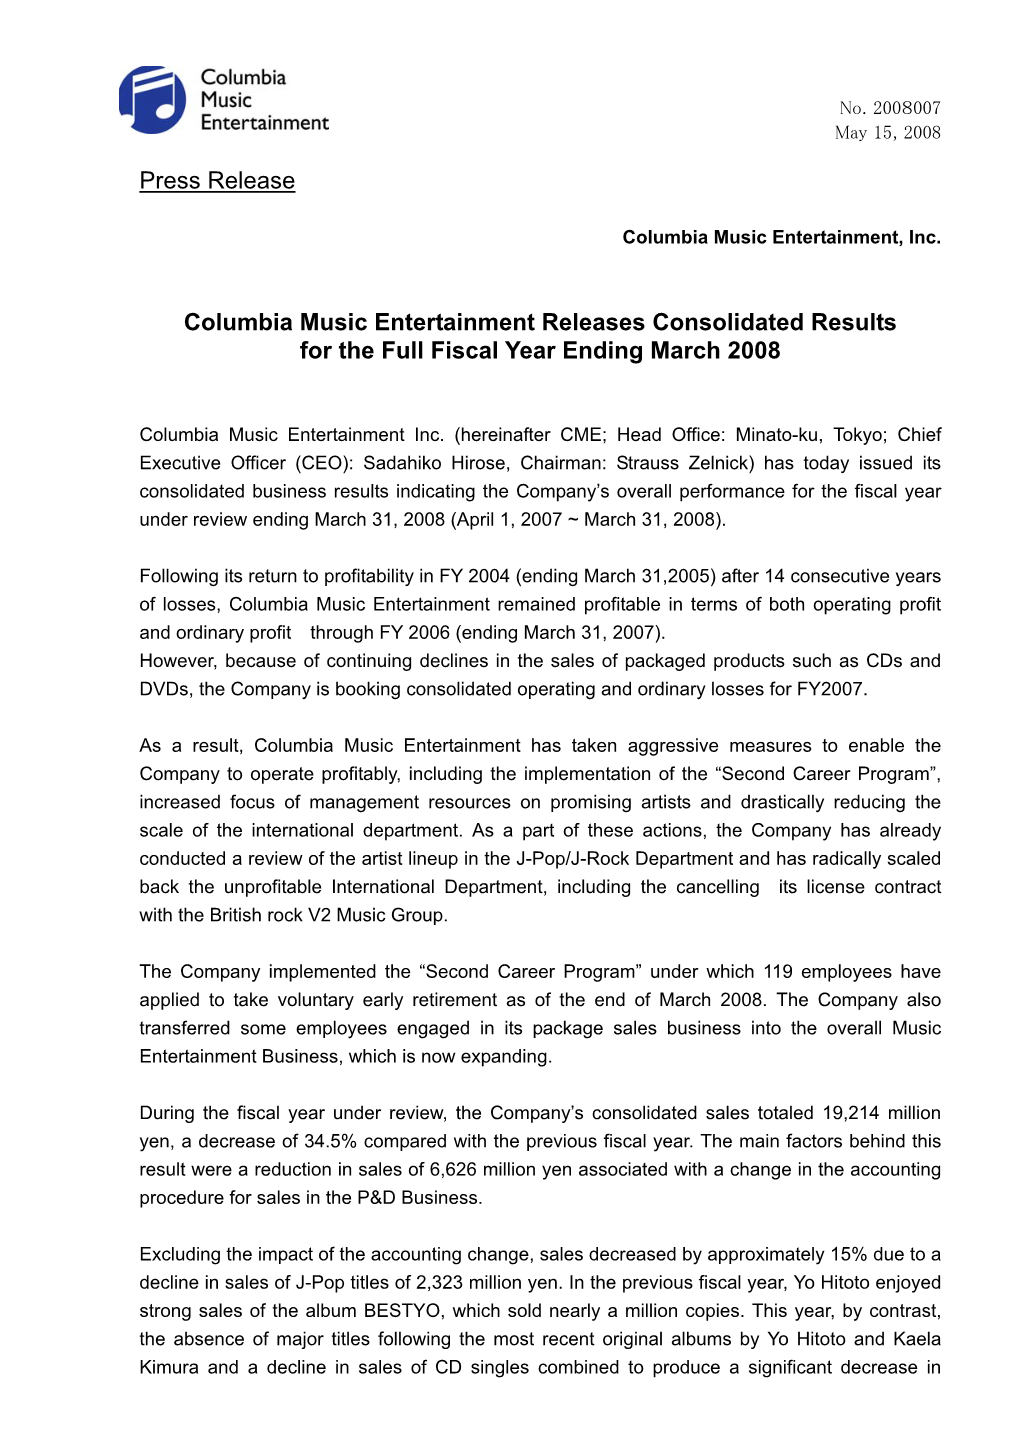 Press Release Columbia Music Entertainment Releases